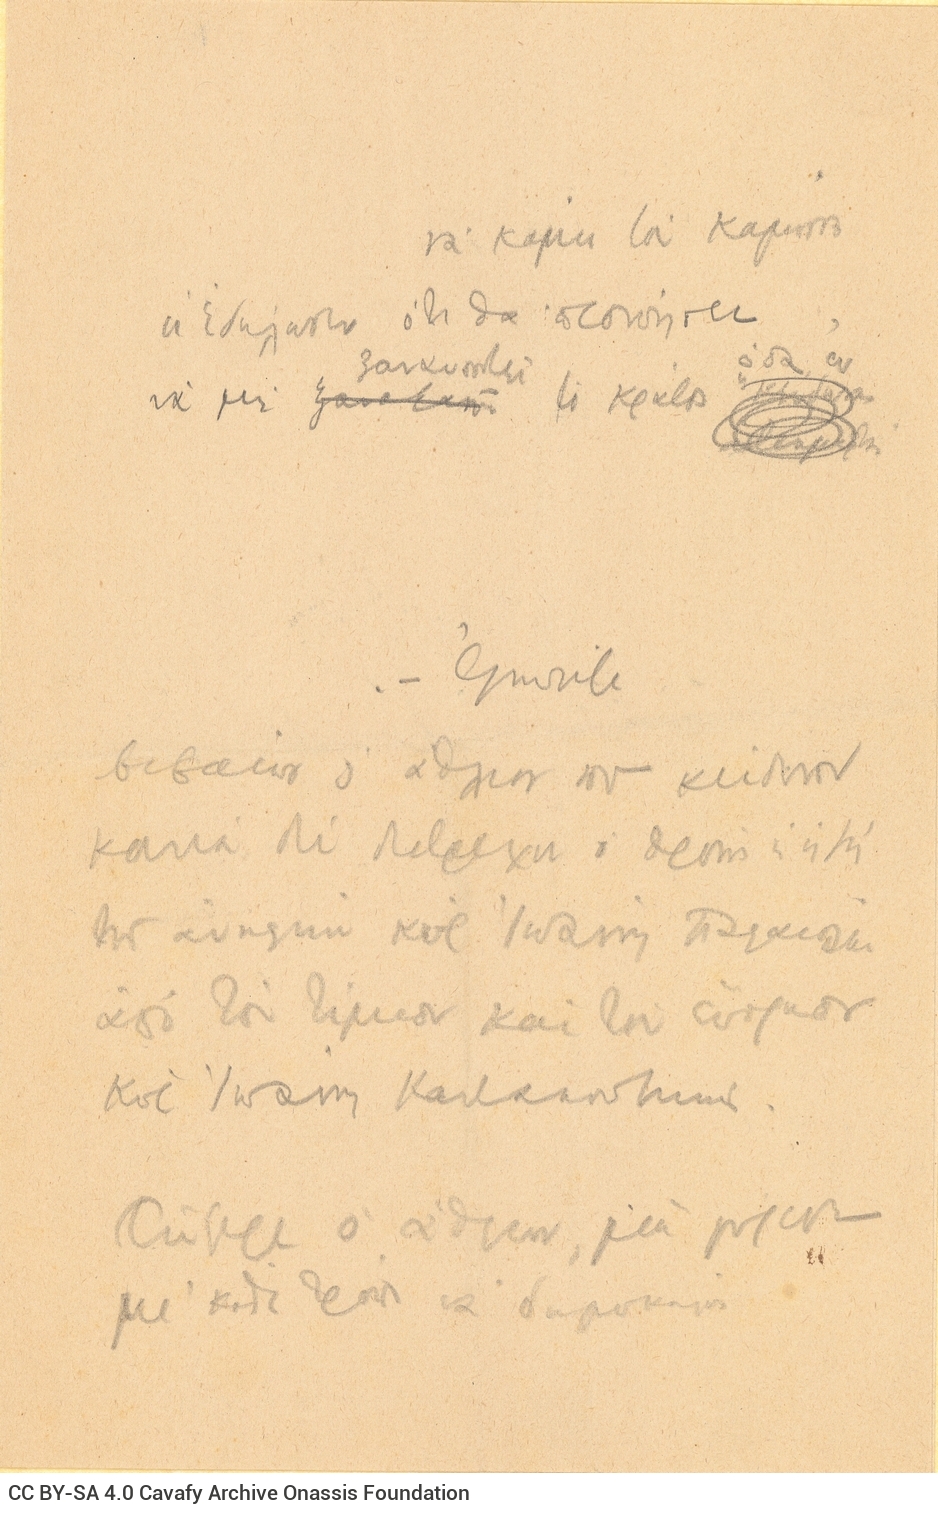 Handwritten drafts of the poem "The Patriarch", on a sheet folded in a bifolio; on both sides of two loose sheets; on part